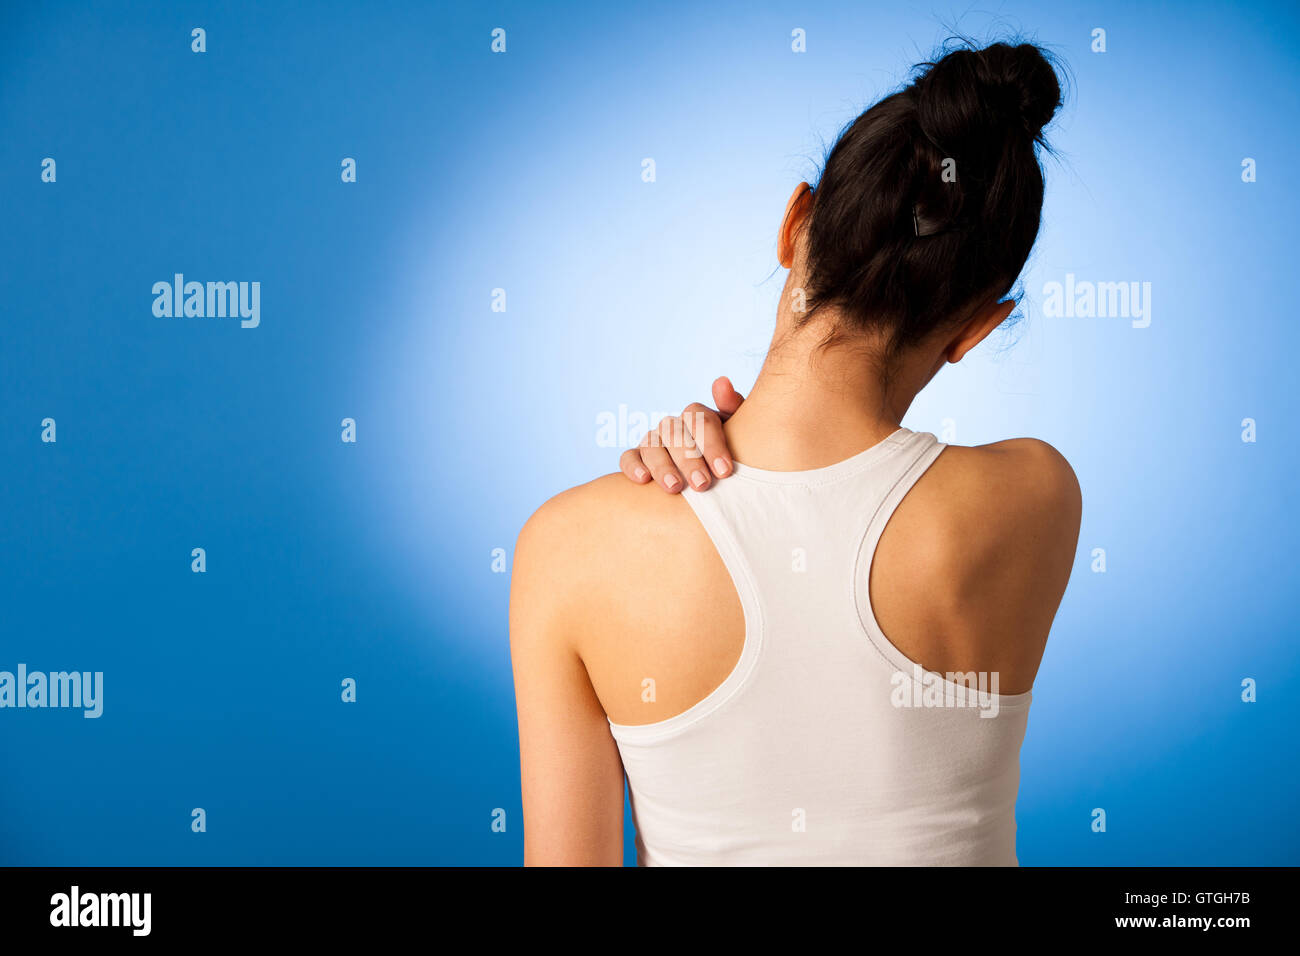 Waman having pain in her neck over blue background Stock Photo